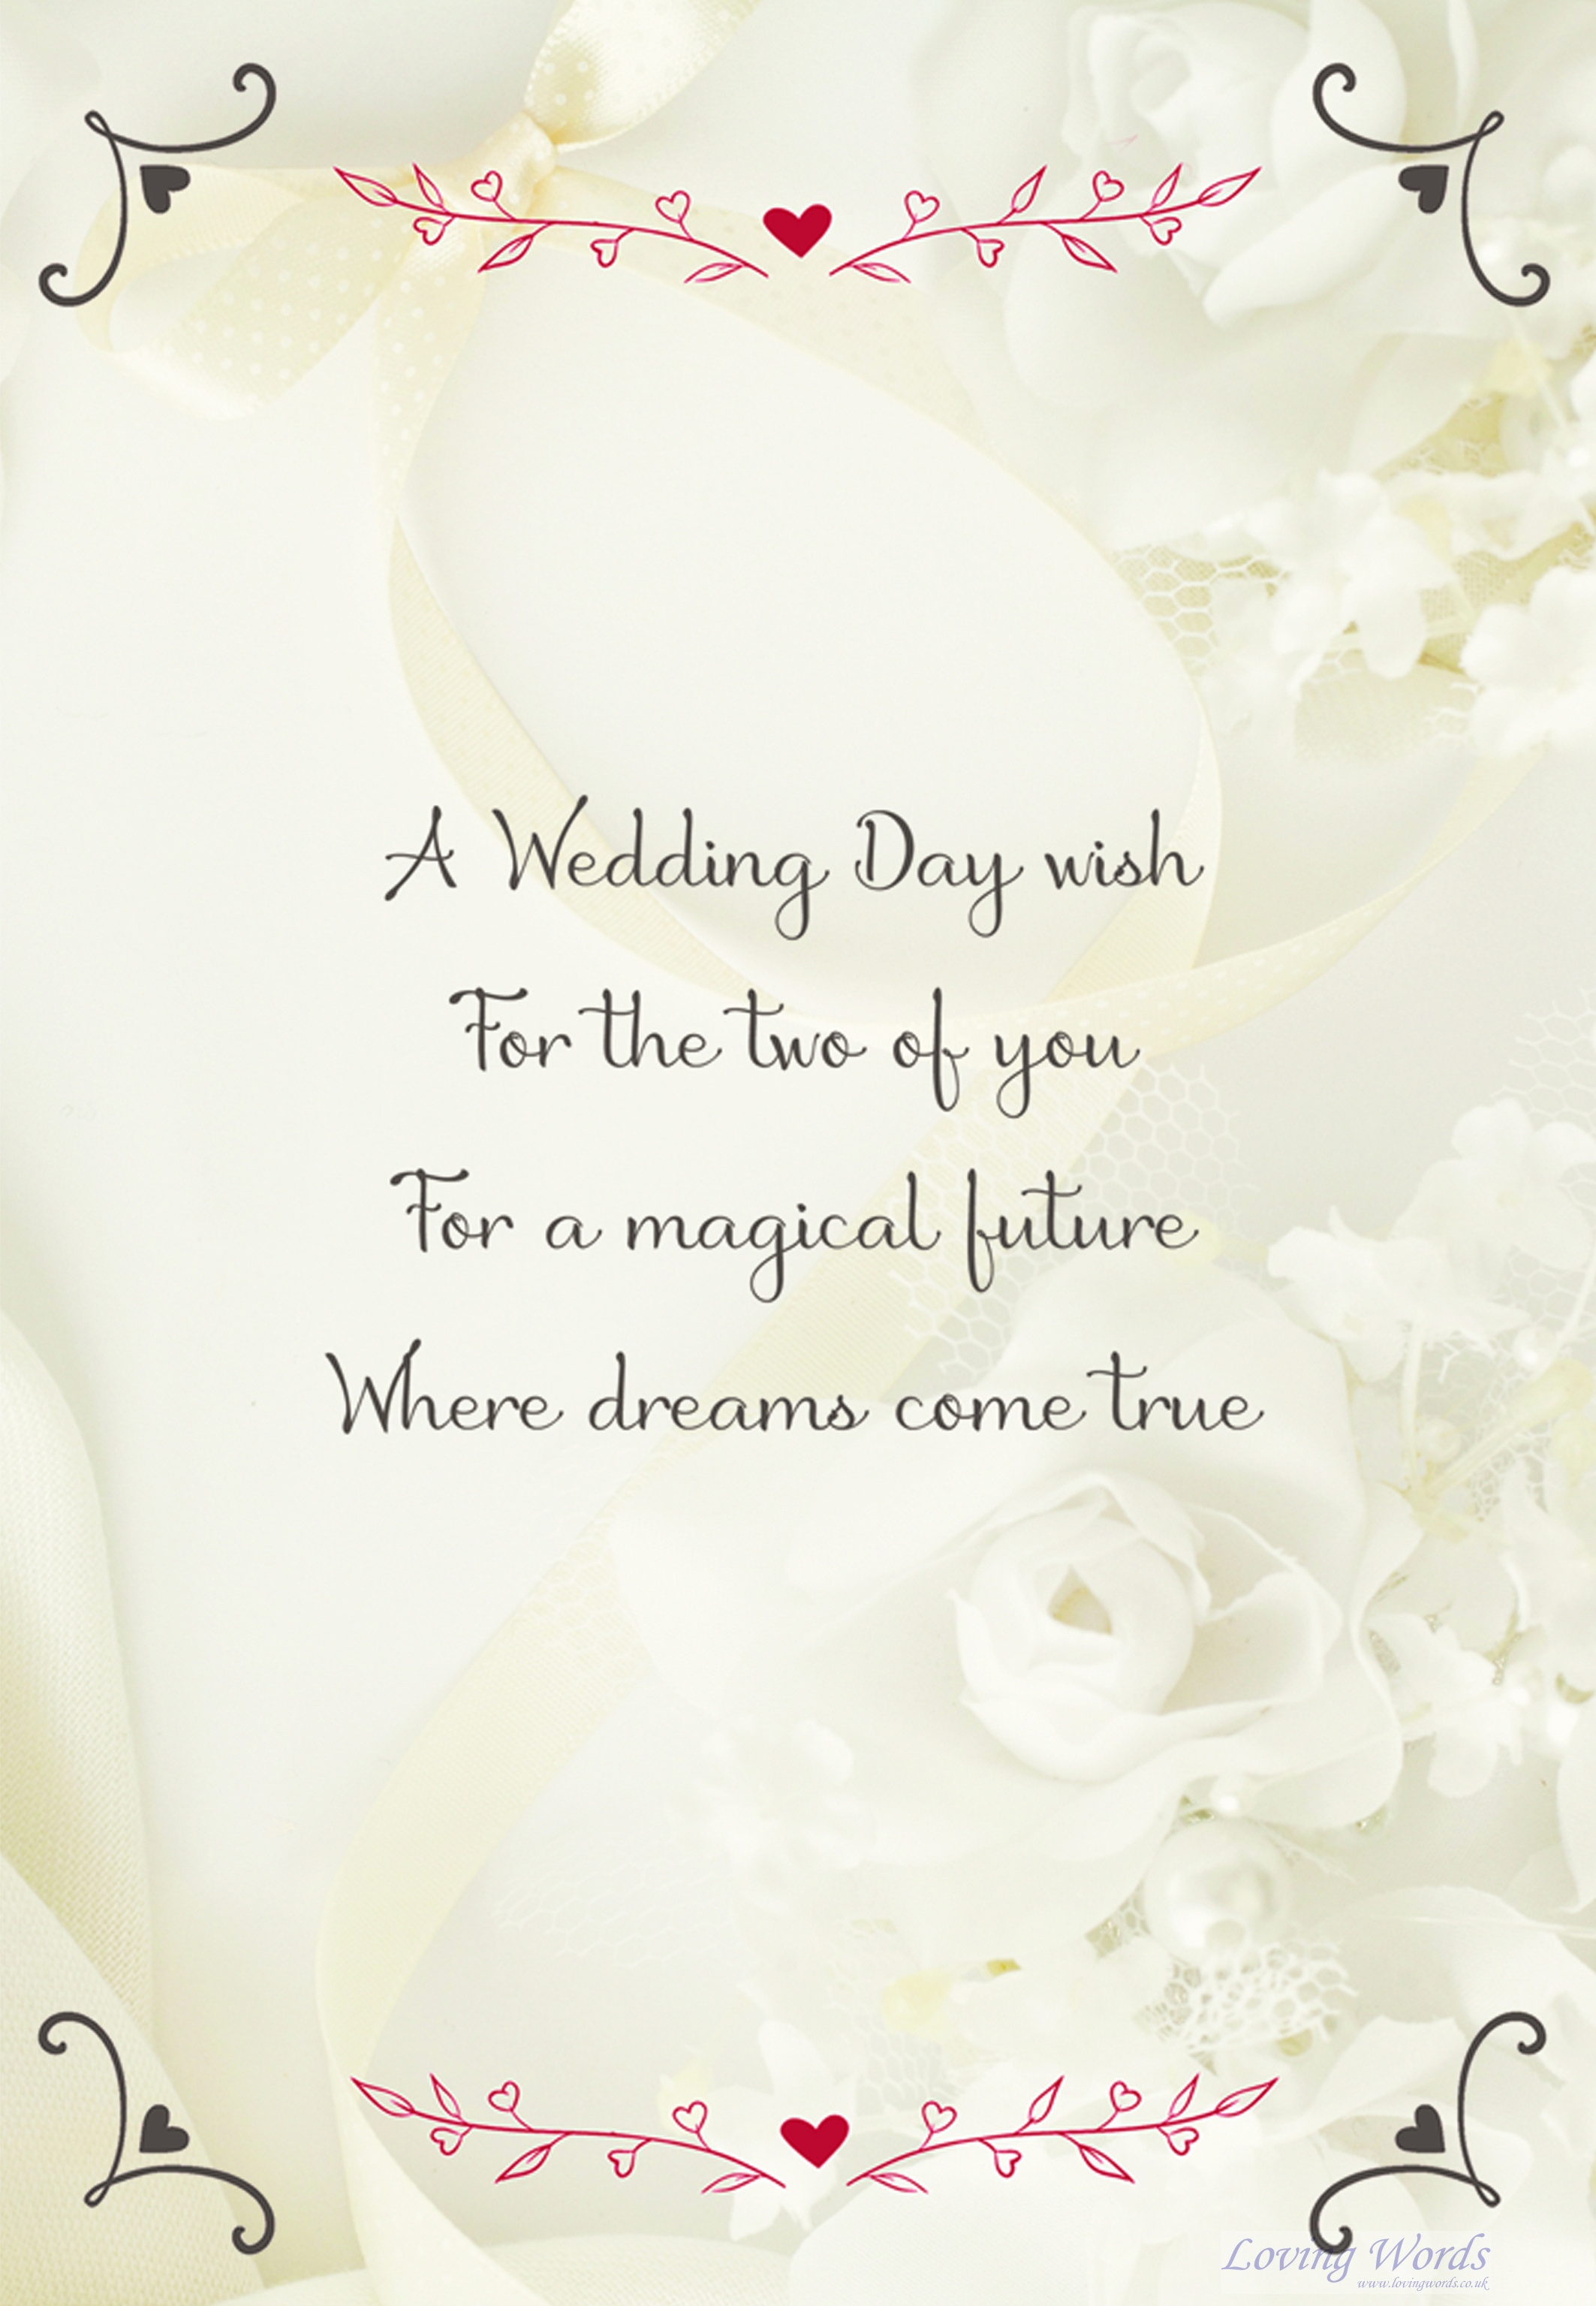 wedding-wishes-messages-samples-image-to-u